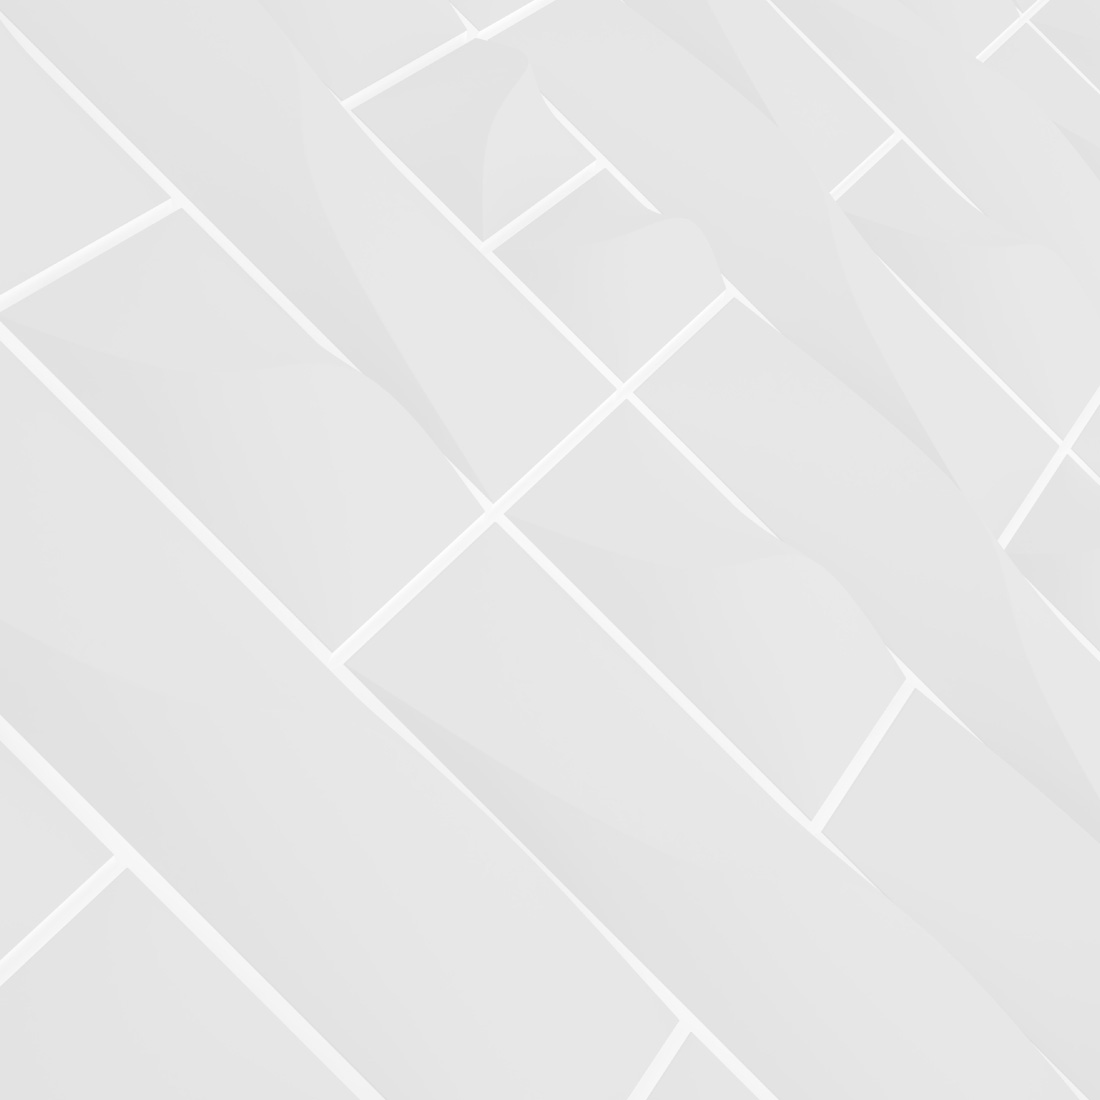 White Geometry Backgrounds preview image.